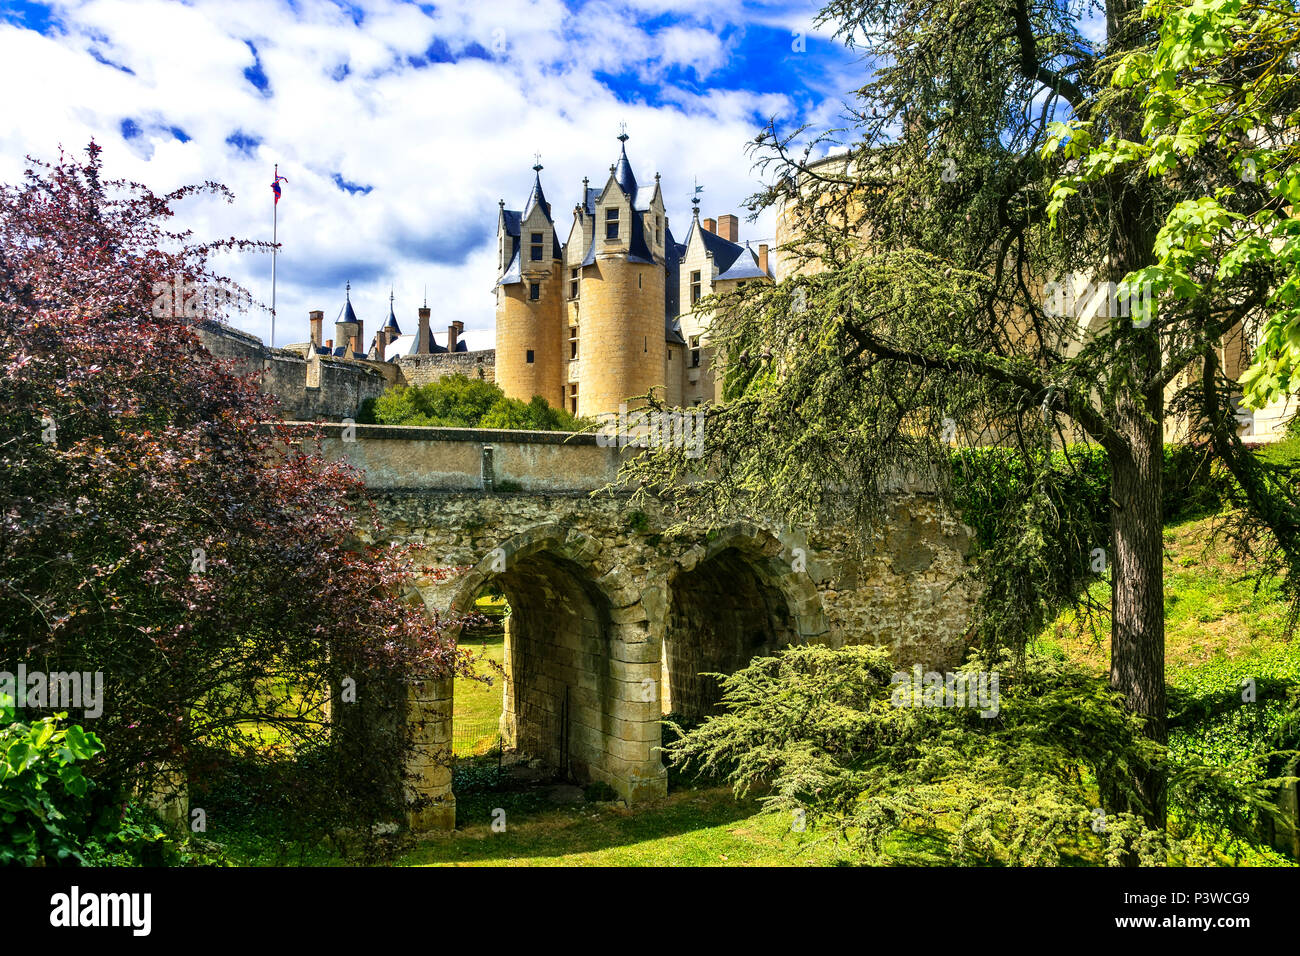 Impressive Montreuil-Bellay medieval castle,view with gardens,Loire valley,France. Stock Photo